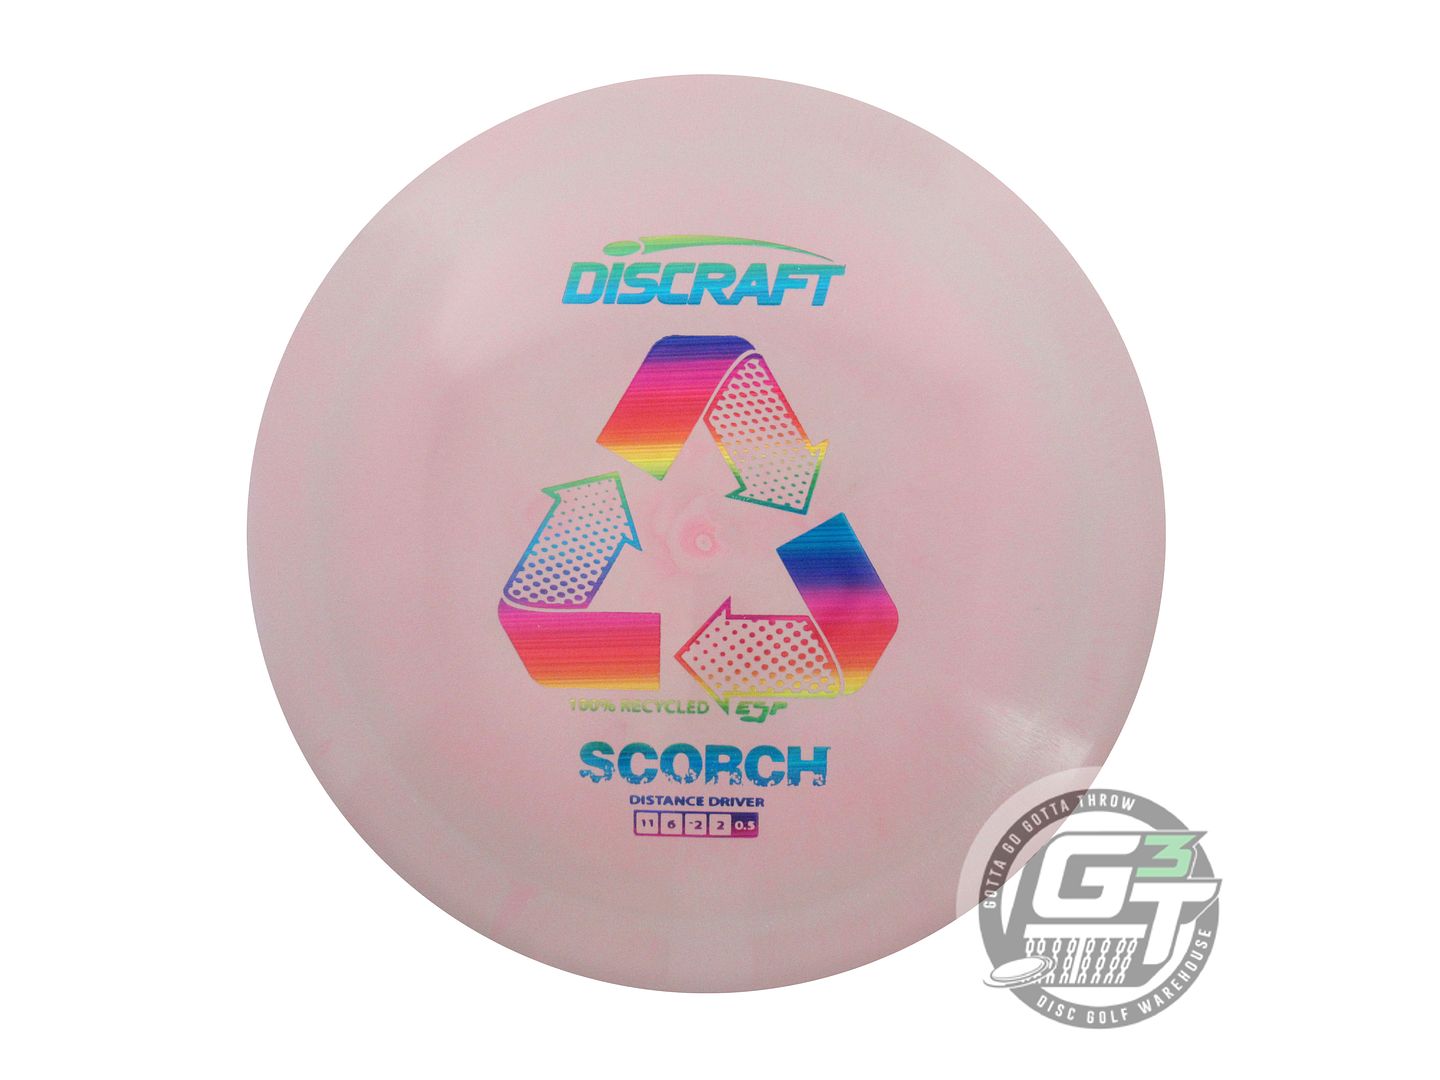 Discraft Recycled ESP Scorch Distance Driver Golf Disc (Individually Listed)